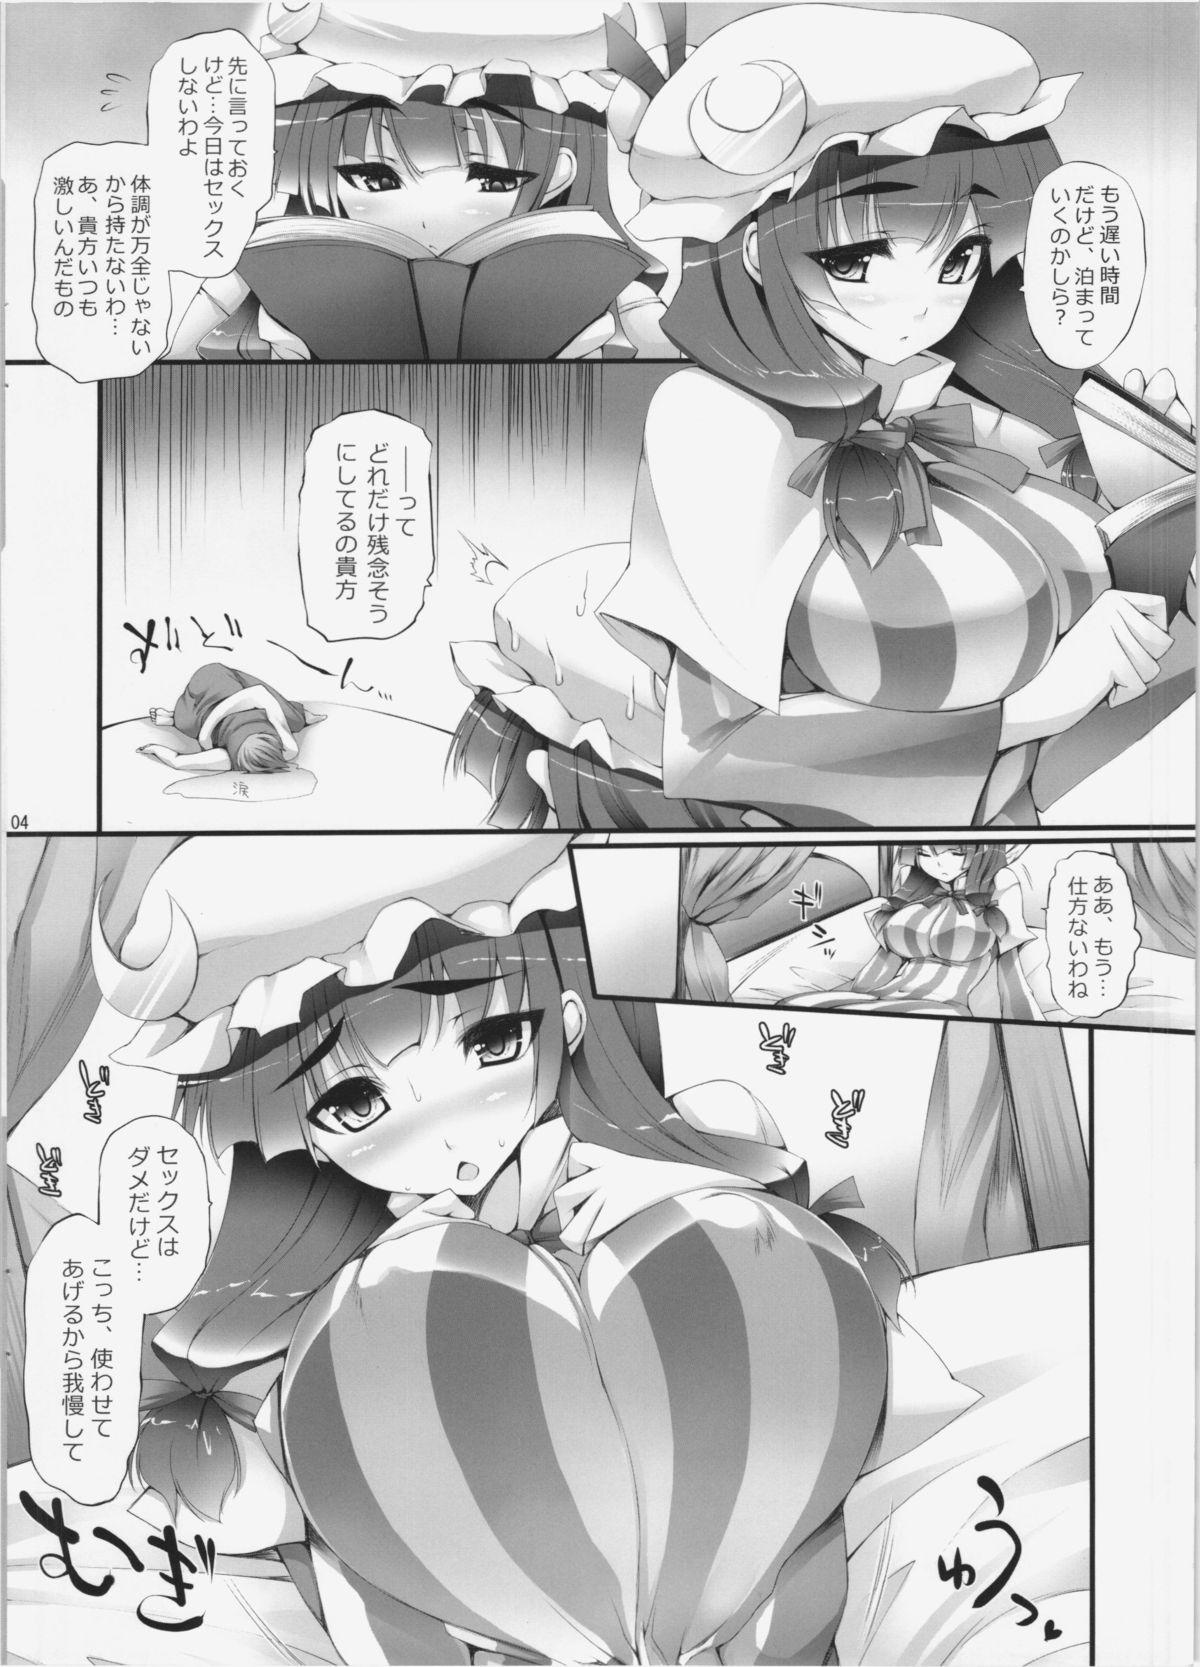 Blow Jobs Porn Inter Mammary 3 - Touhou project Culo Grande - Page 3